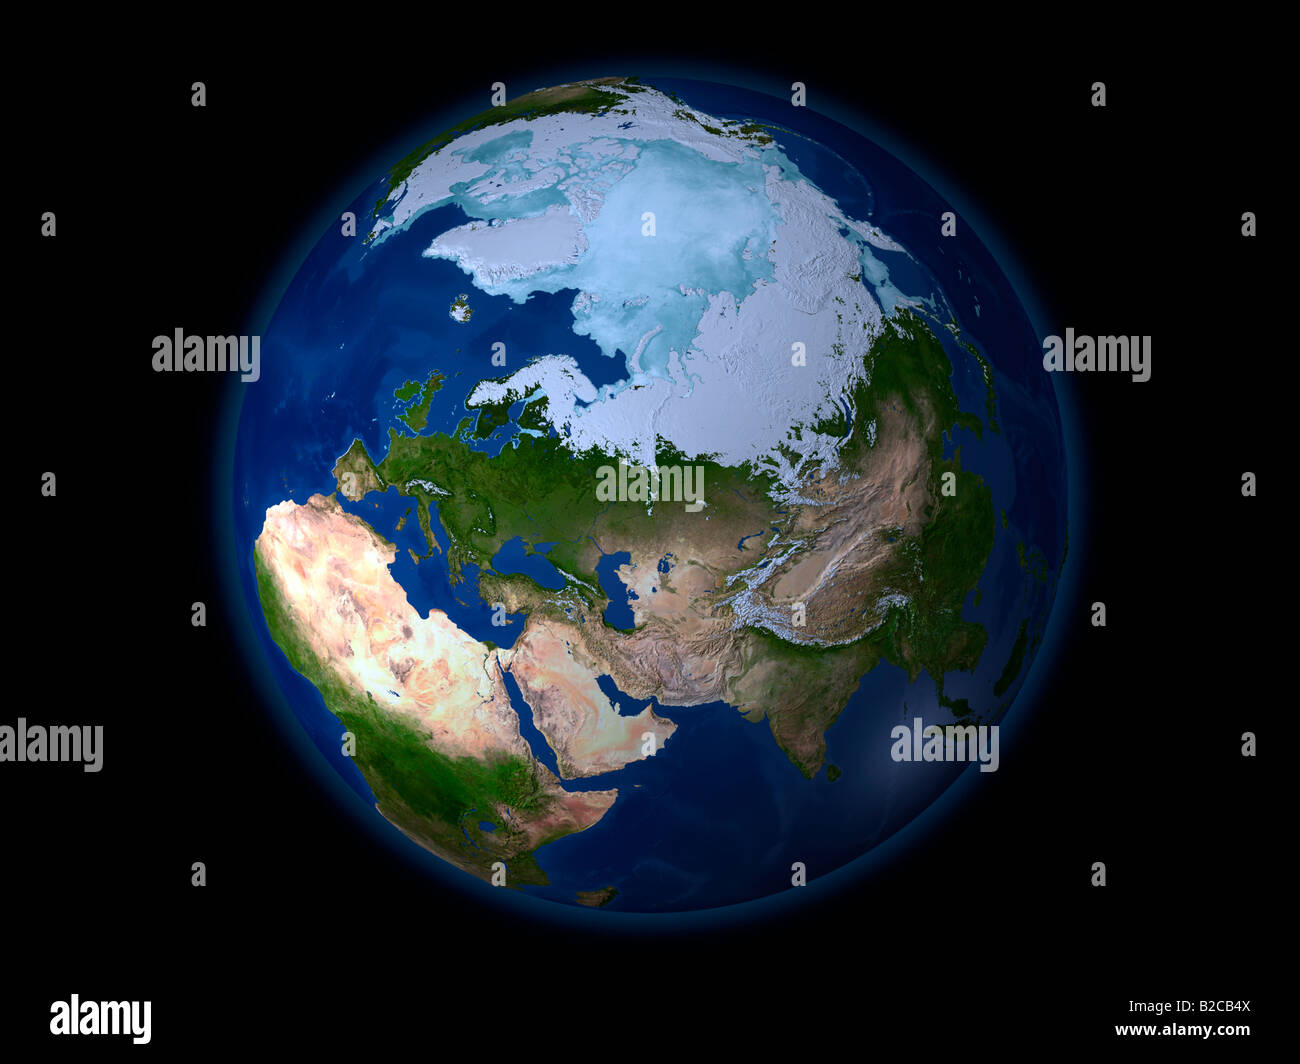 Full Earth showing the Arctic region. Stock Photo